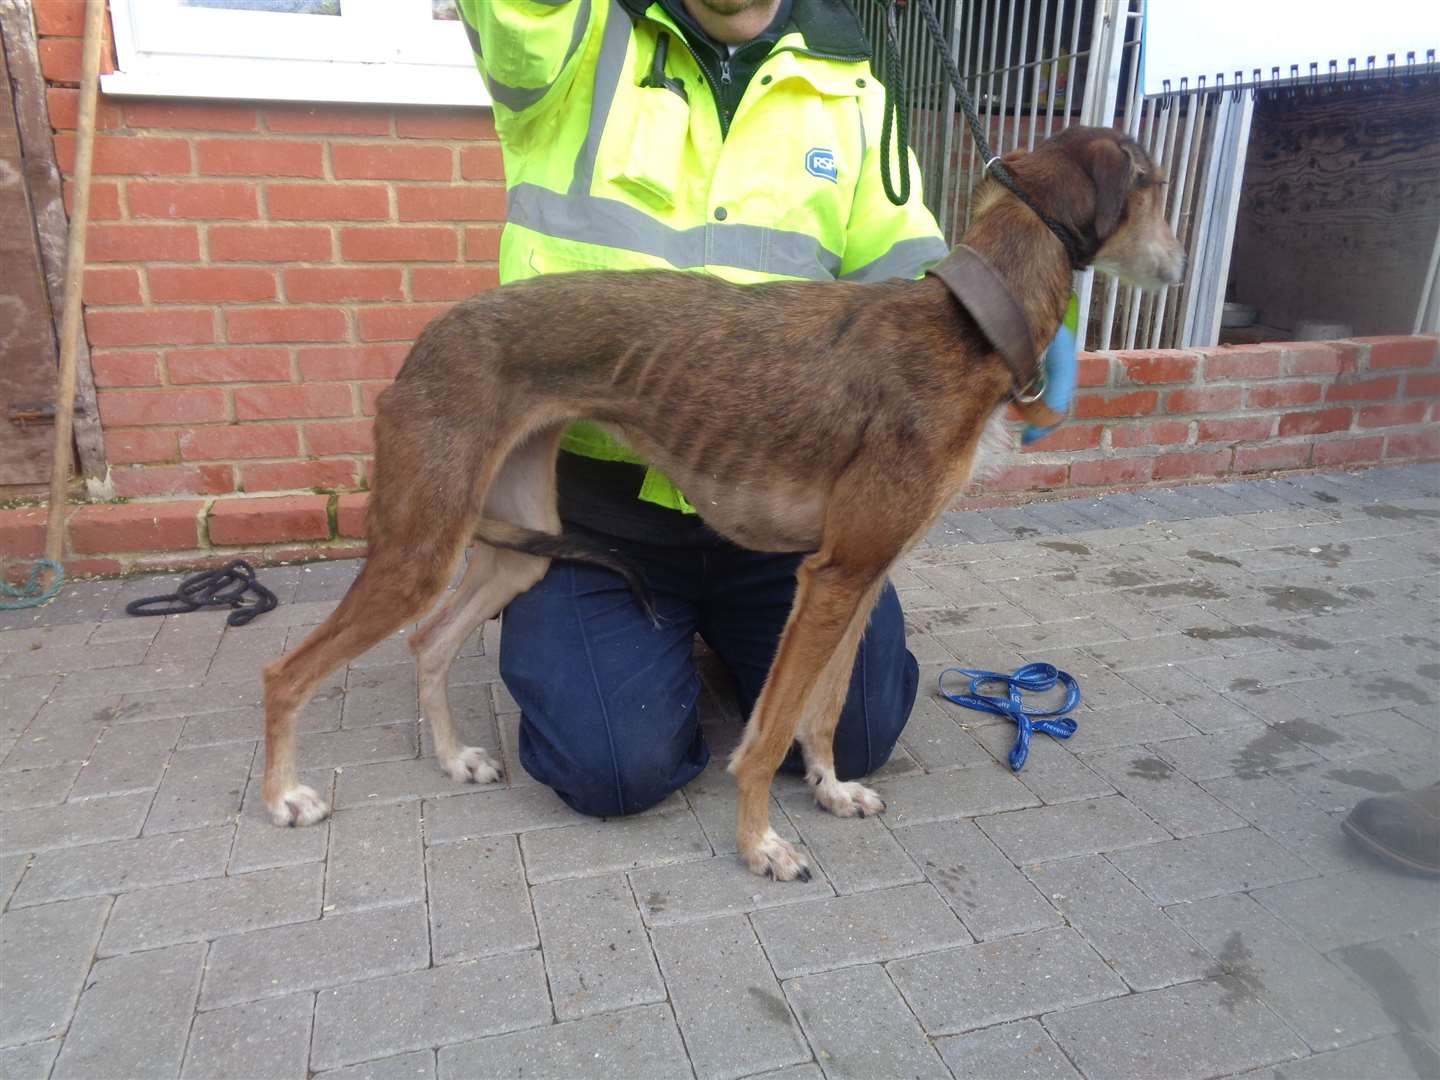 RSPCA officers found the dogs in poor conditions in Ditton, near Aylesford. Picture: RSPCA